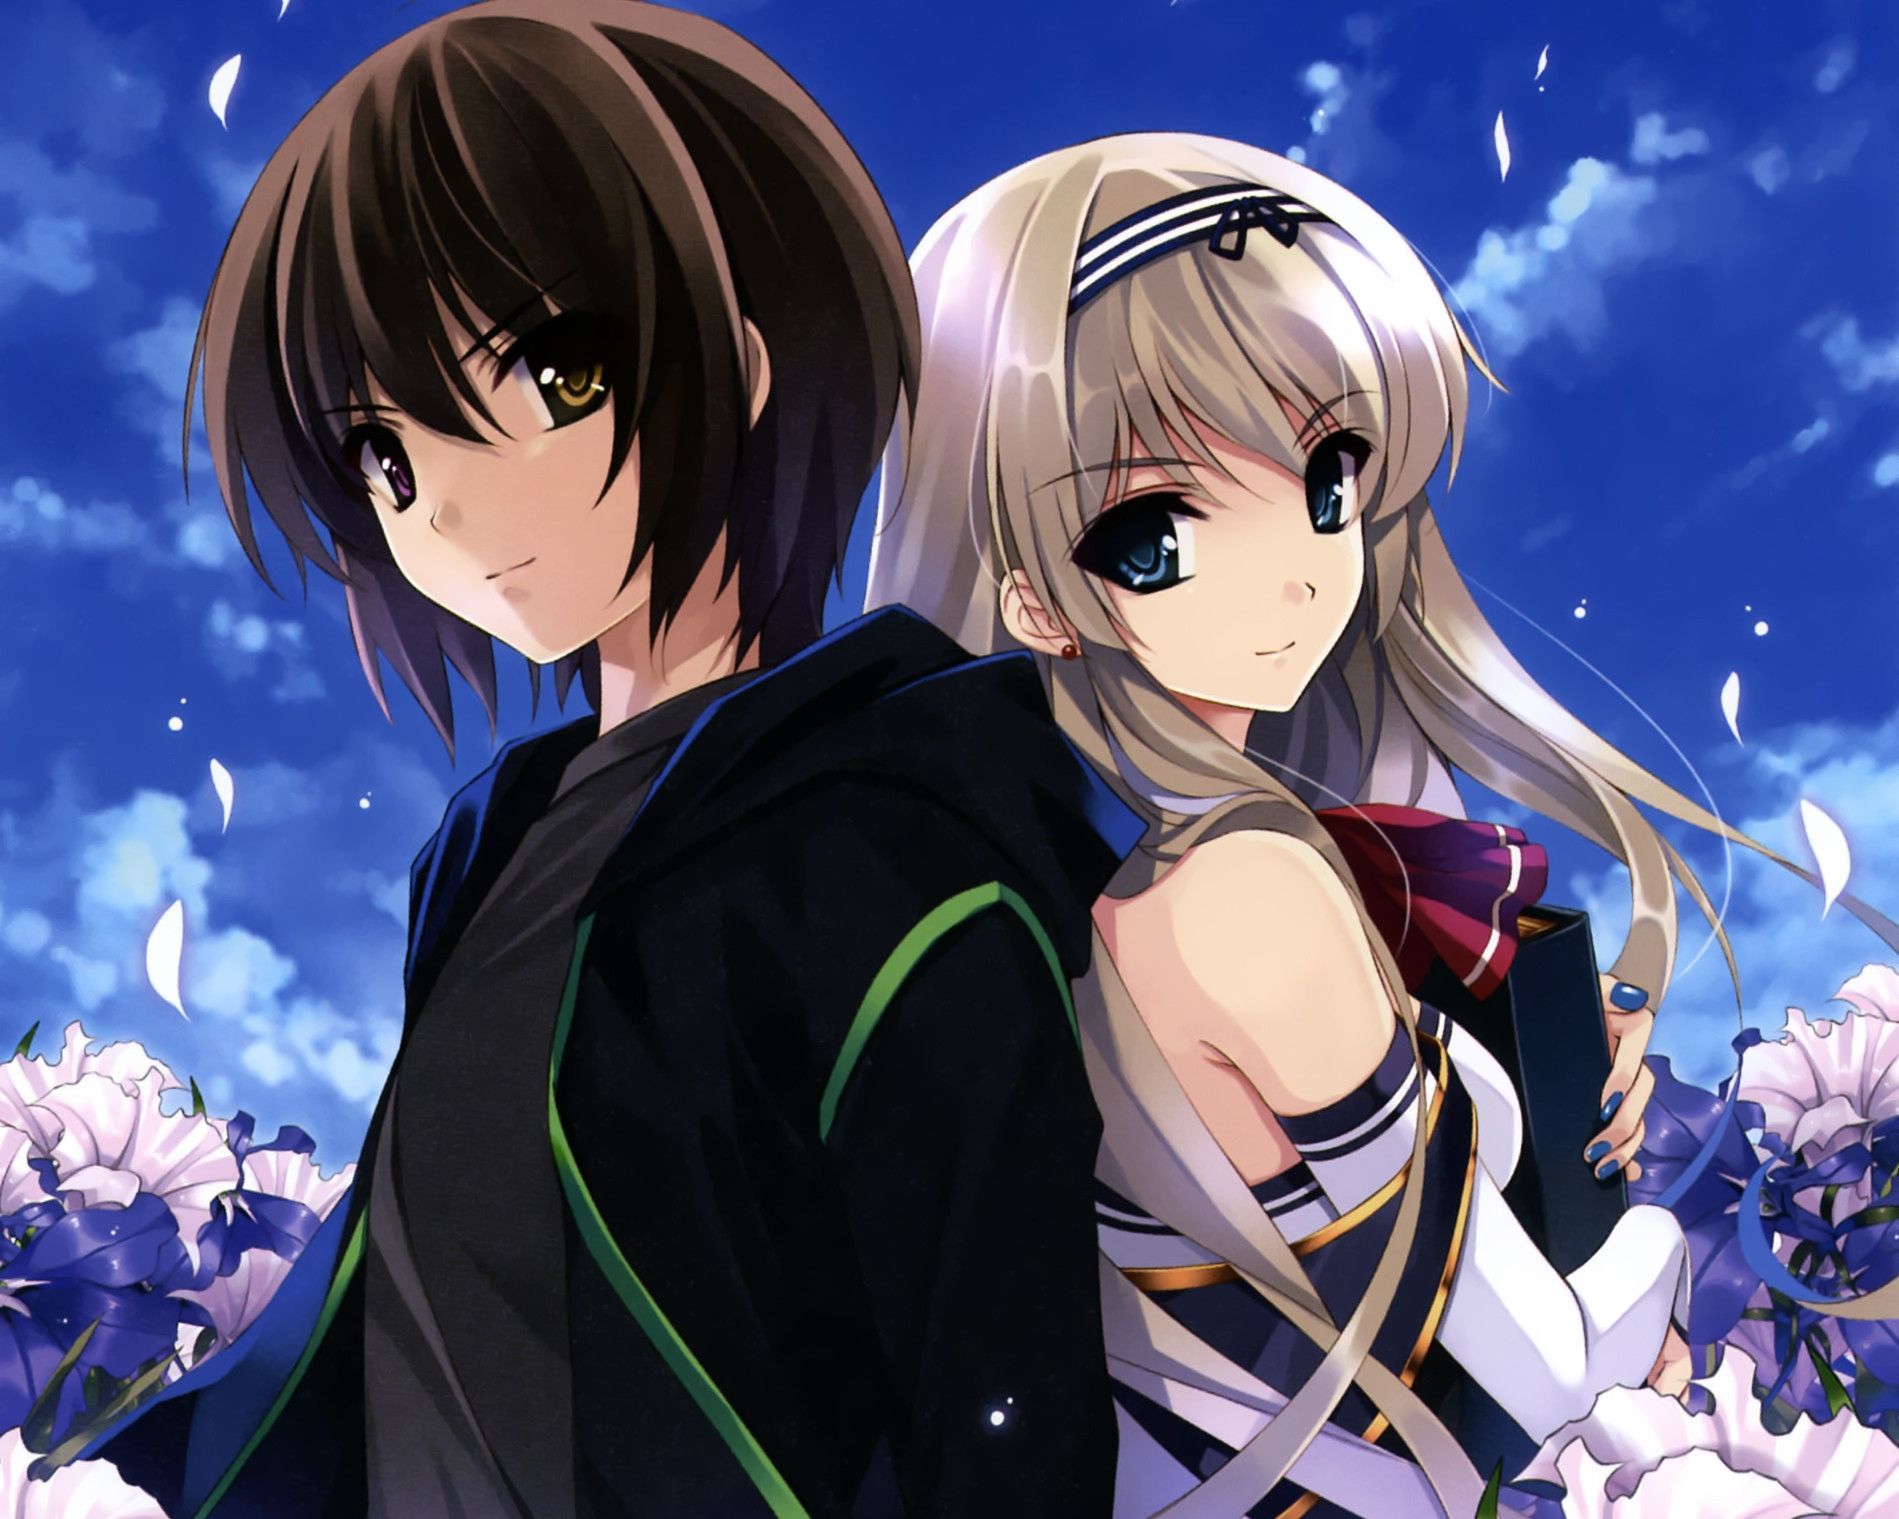 500 Dark Anime Couple Wallpapers  Background Beautiful Best Available For  Download Dark Anime Couple Images Free On Zicxacomphotos  Zicxa Photos